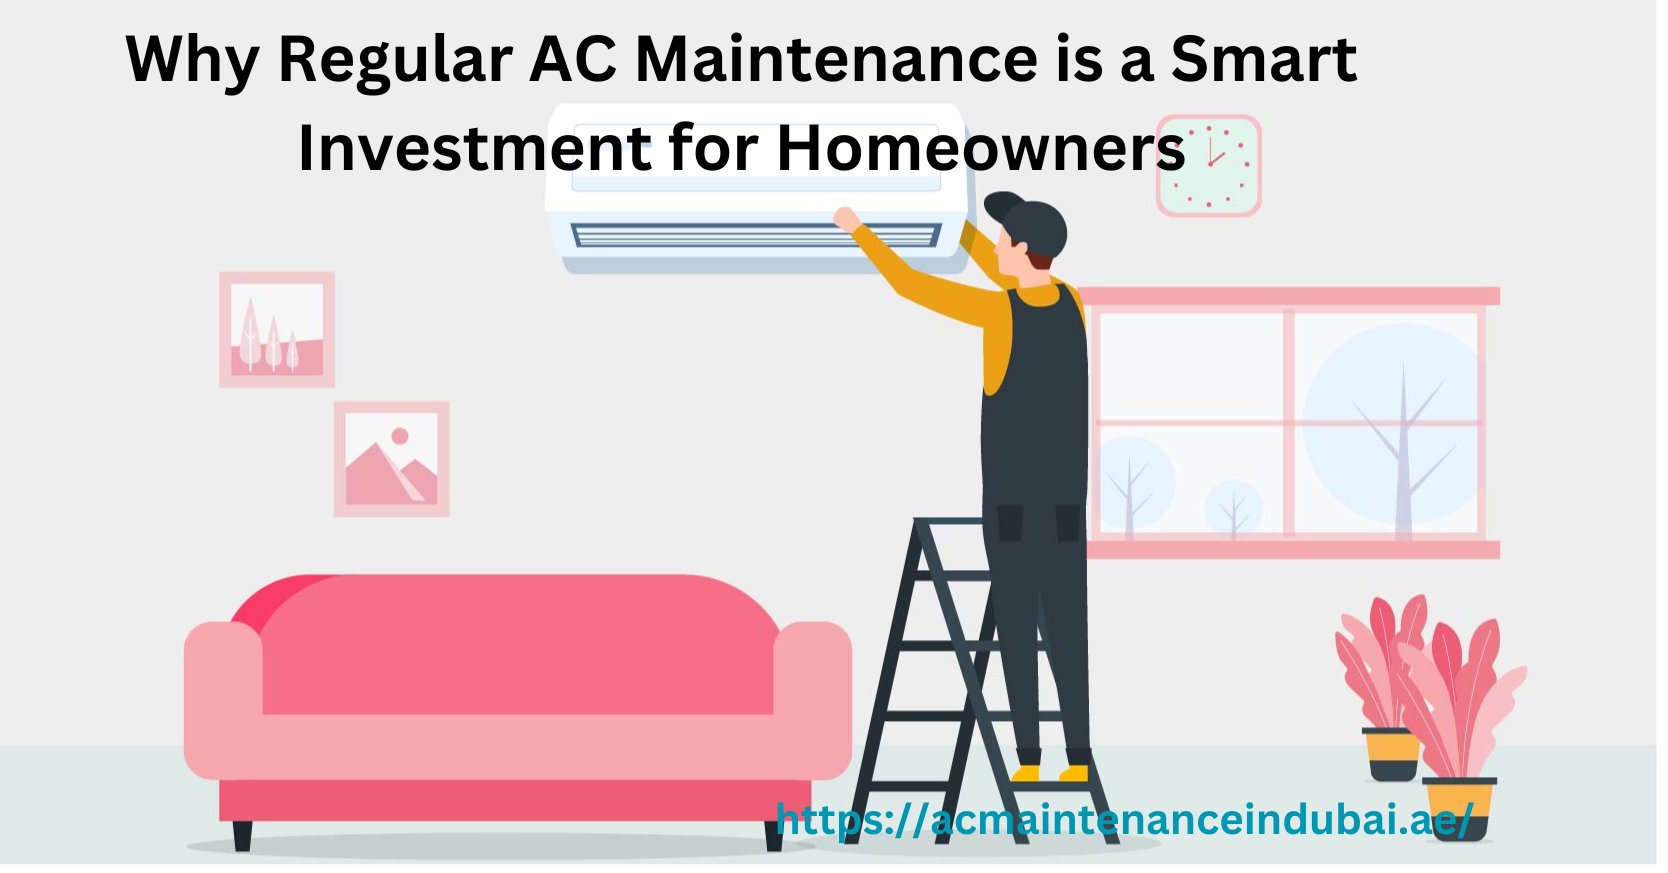 Why Regular AC Maintenance is a Smart Investment for Homeowners